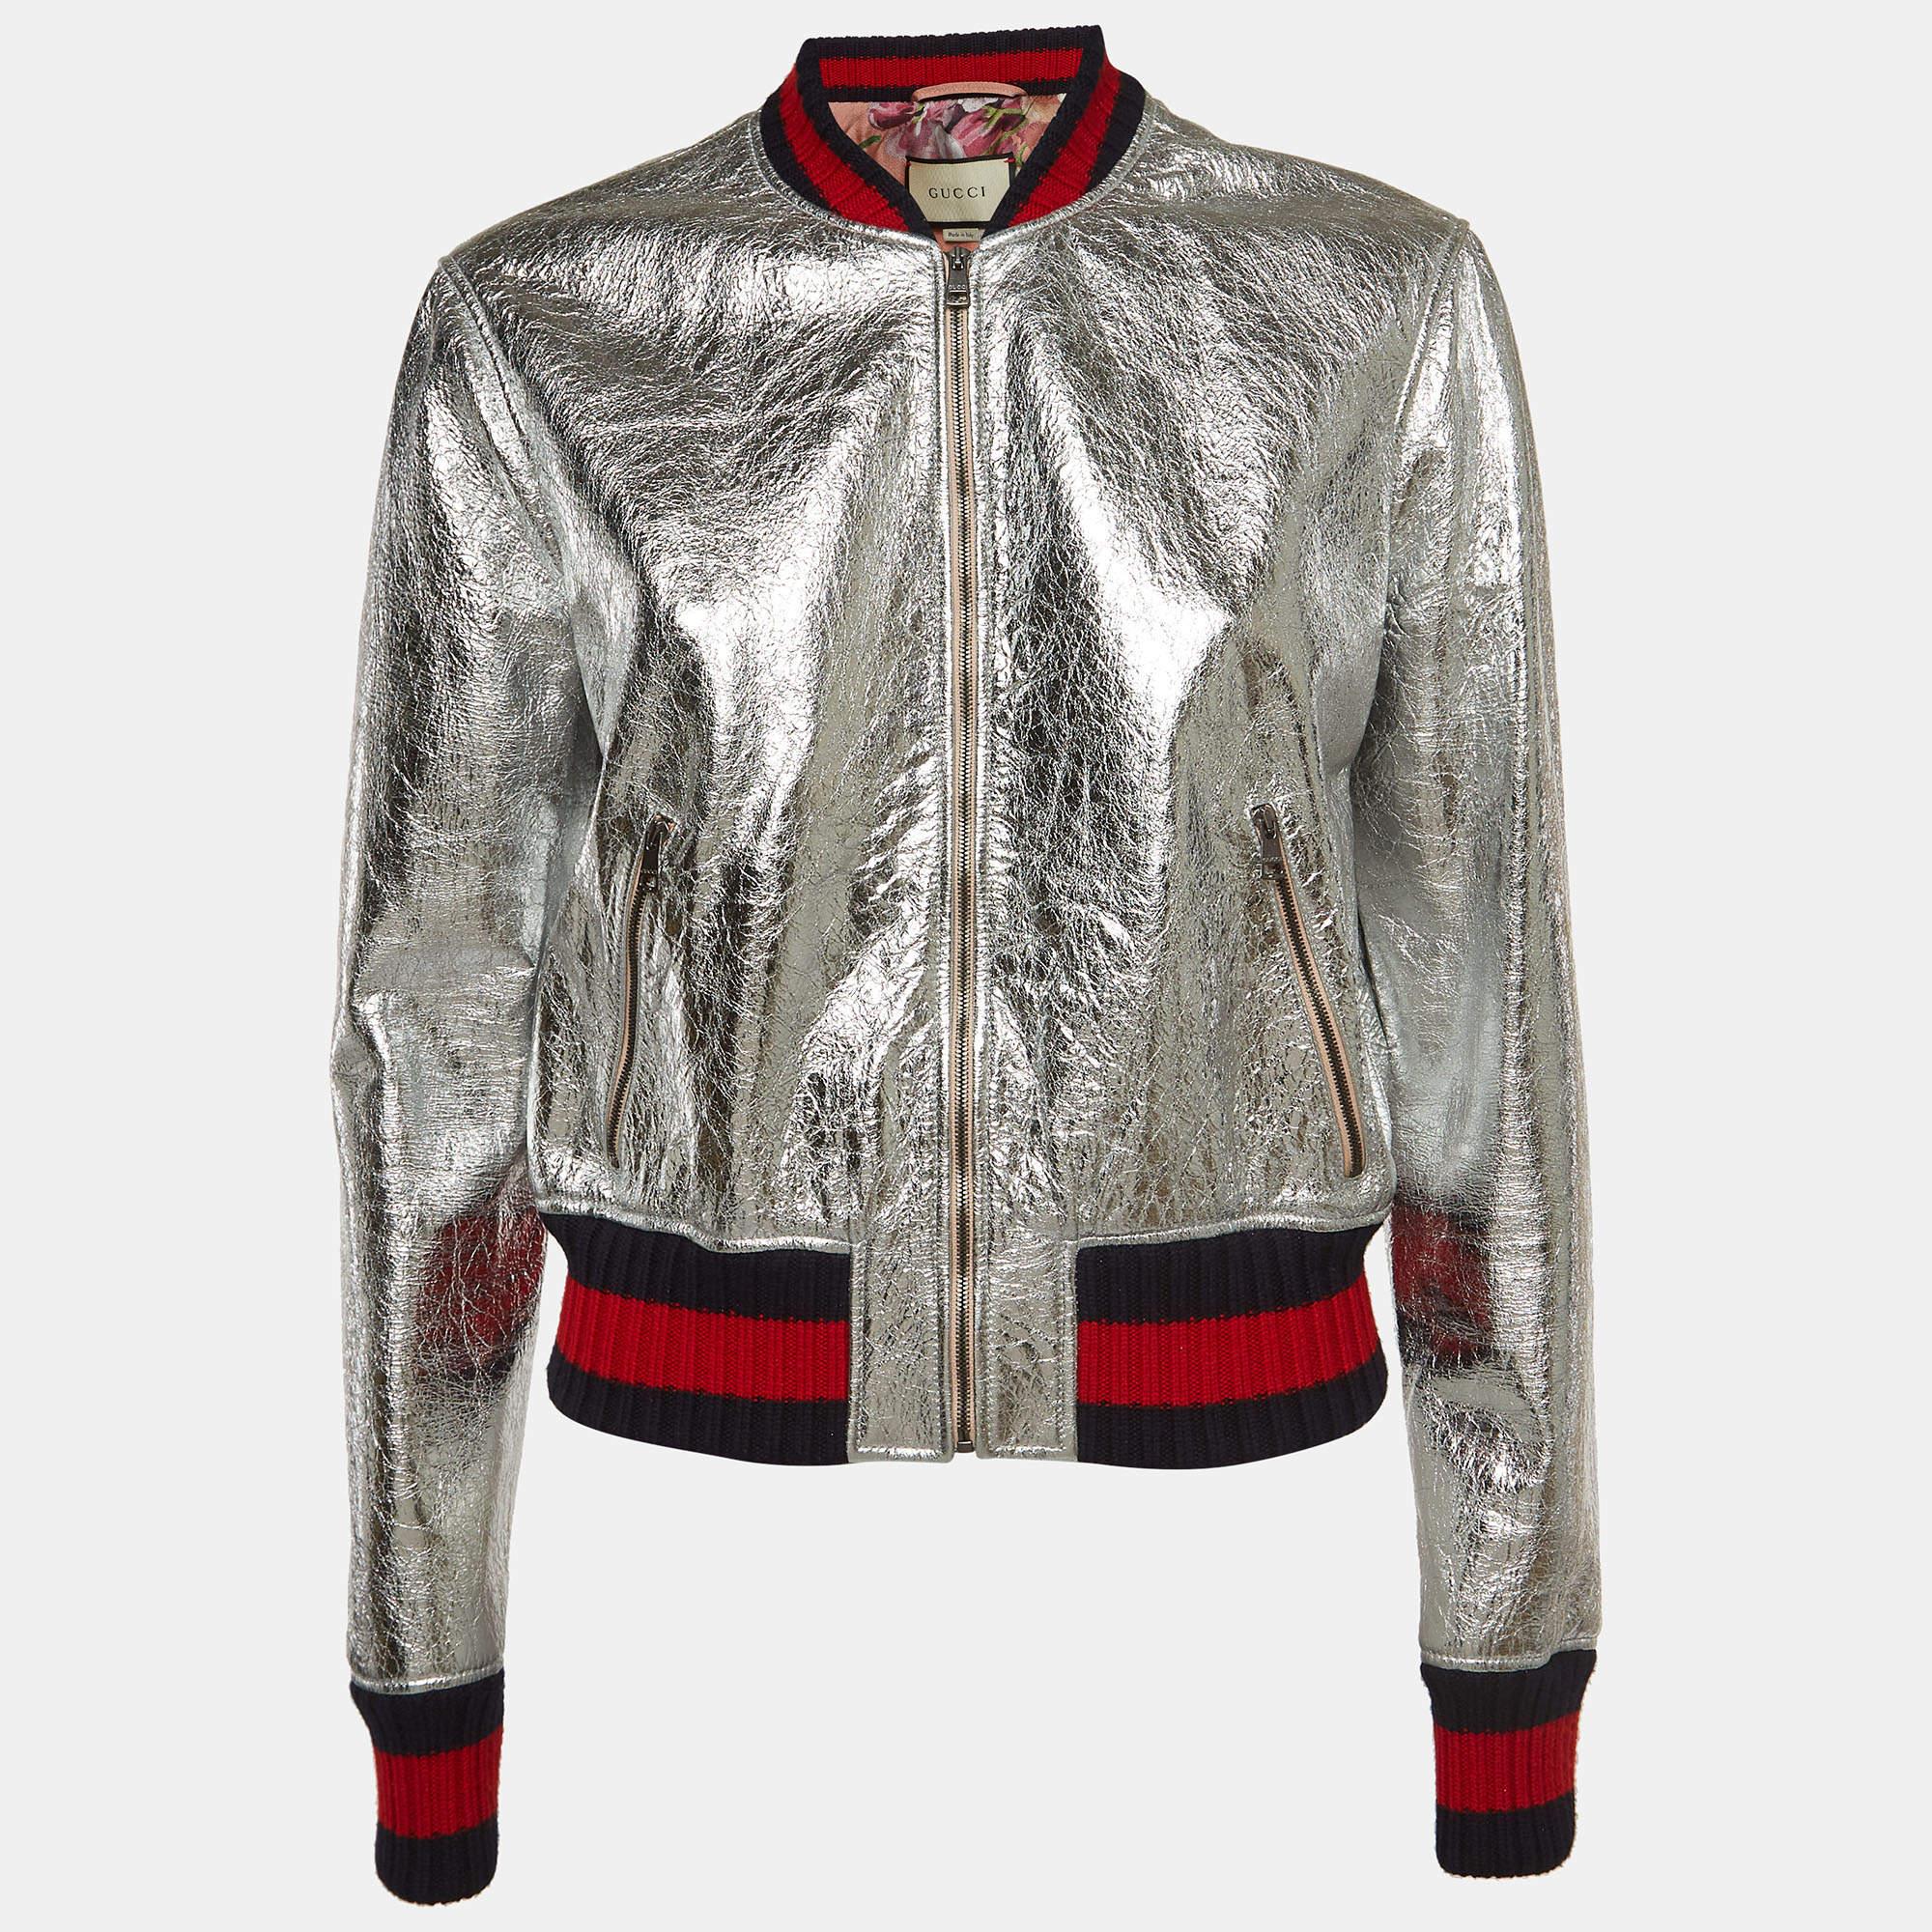 Infuse an extra dose of style into your outfit with this highly fashionable jacket from Gucci. Tailored from quality materials, it embodies a contemporary vibe and is filled with functional characteristics.

